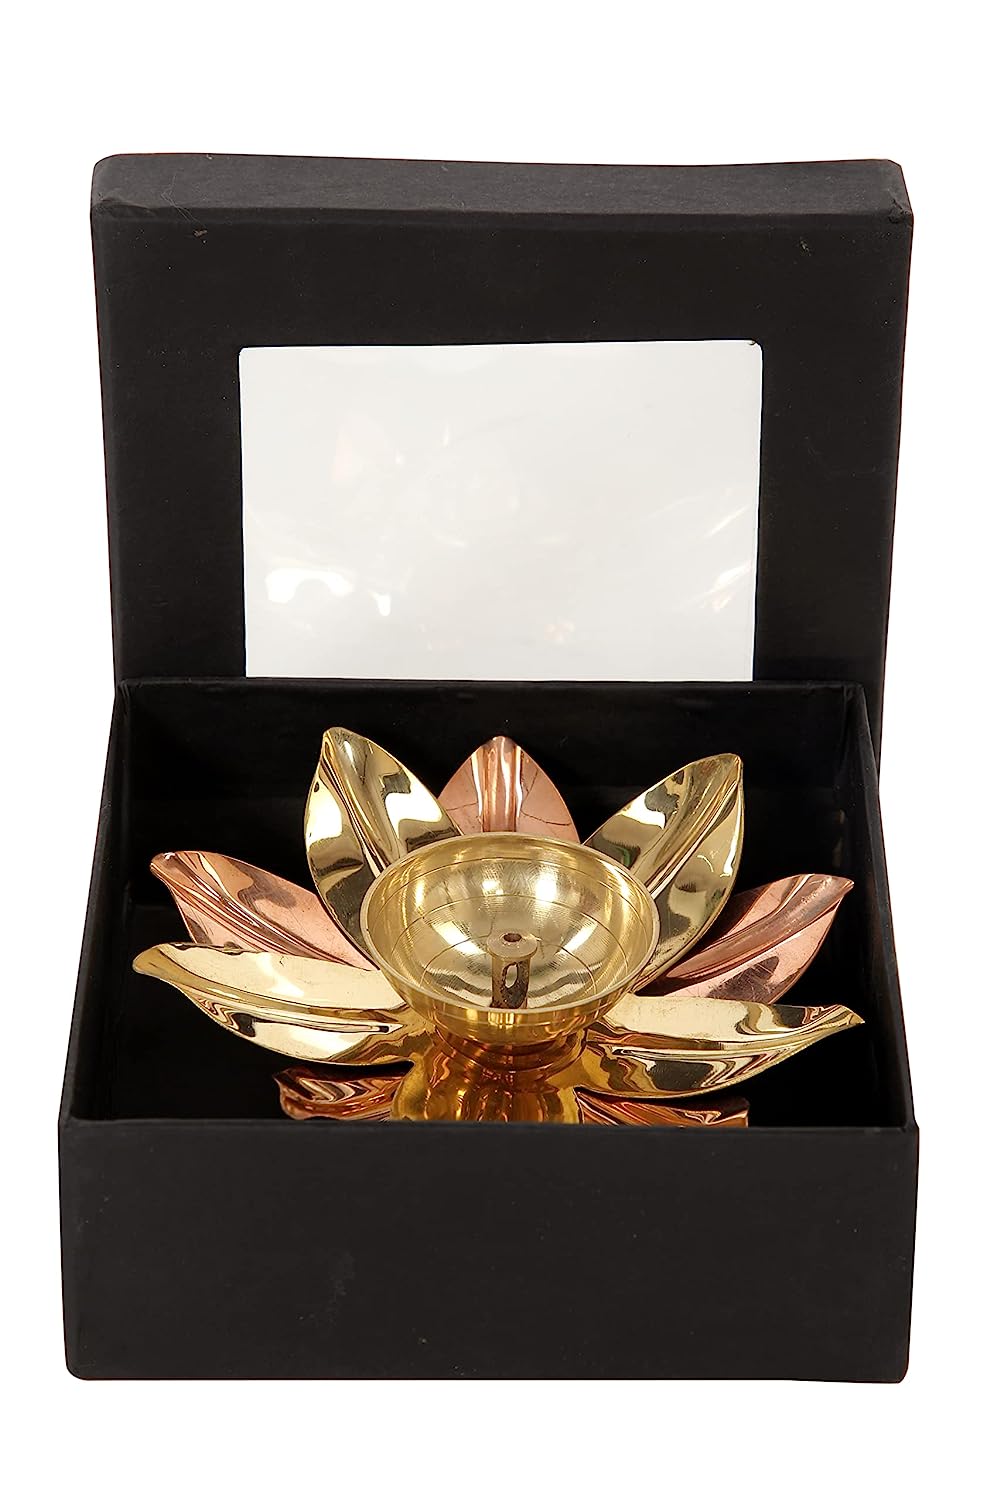 Rudra Exports Brass & Copper Akhand Jyot Diya with Decorative Oil Diya Lotus Shape for Diwali, Puja and Festival Decoration